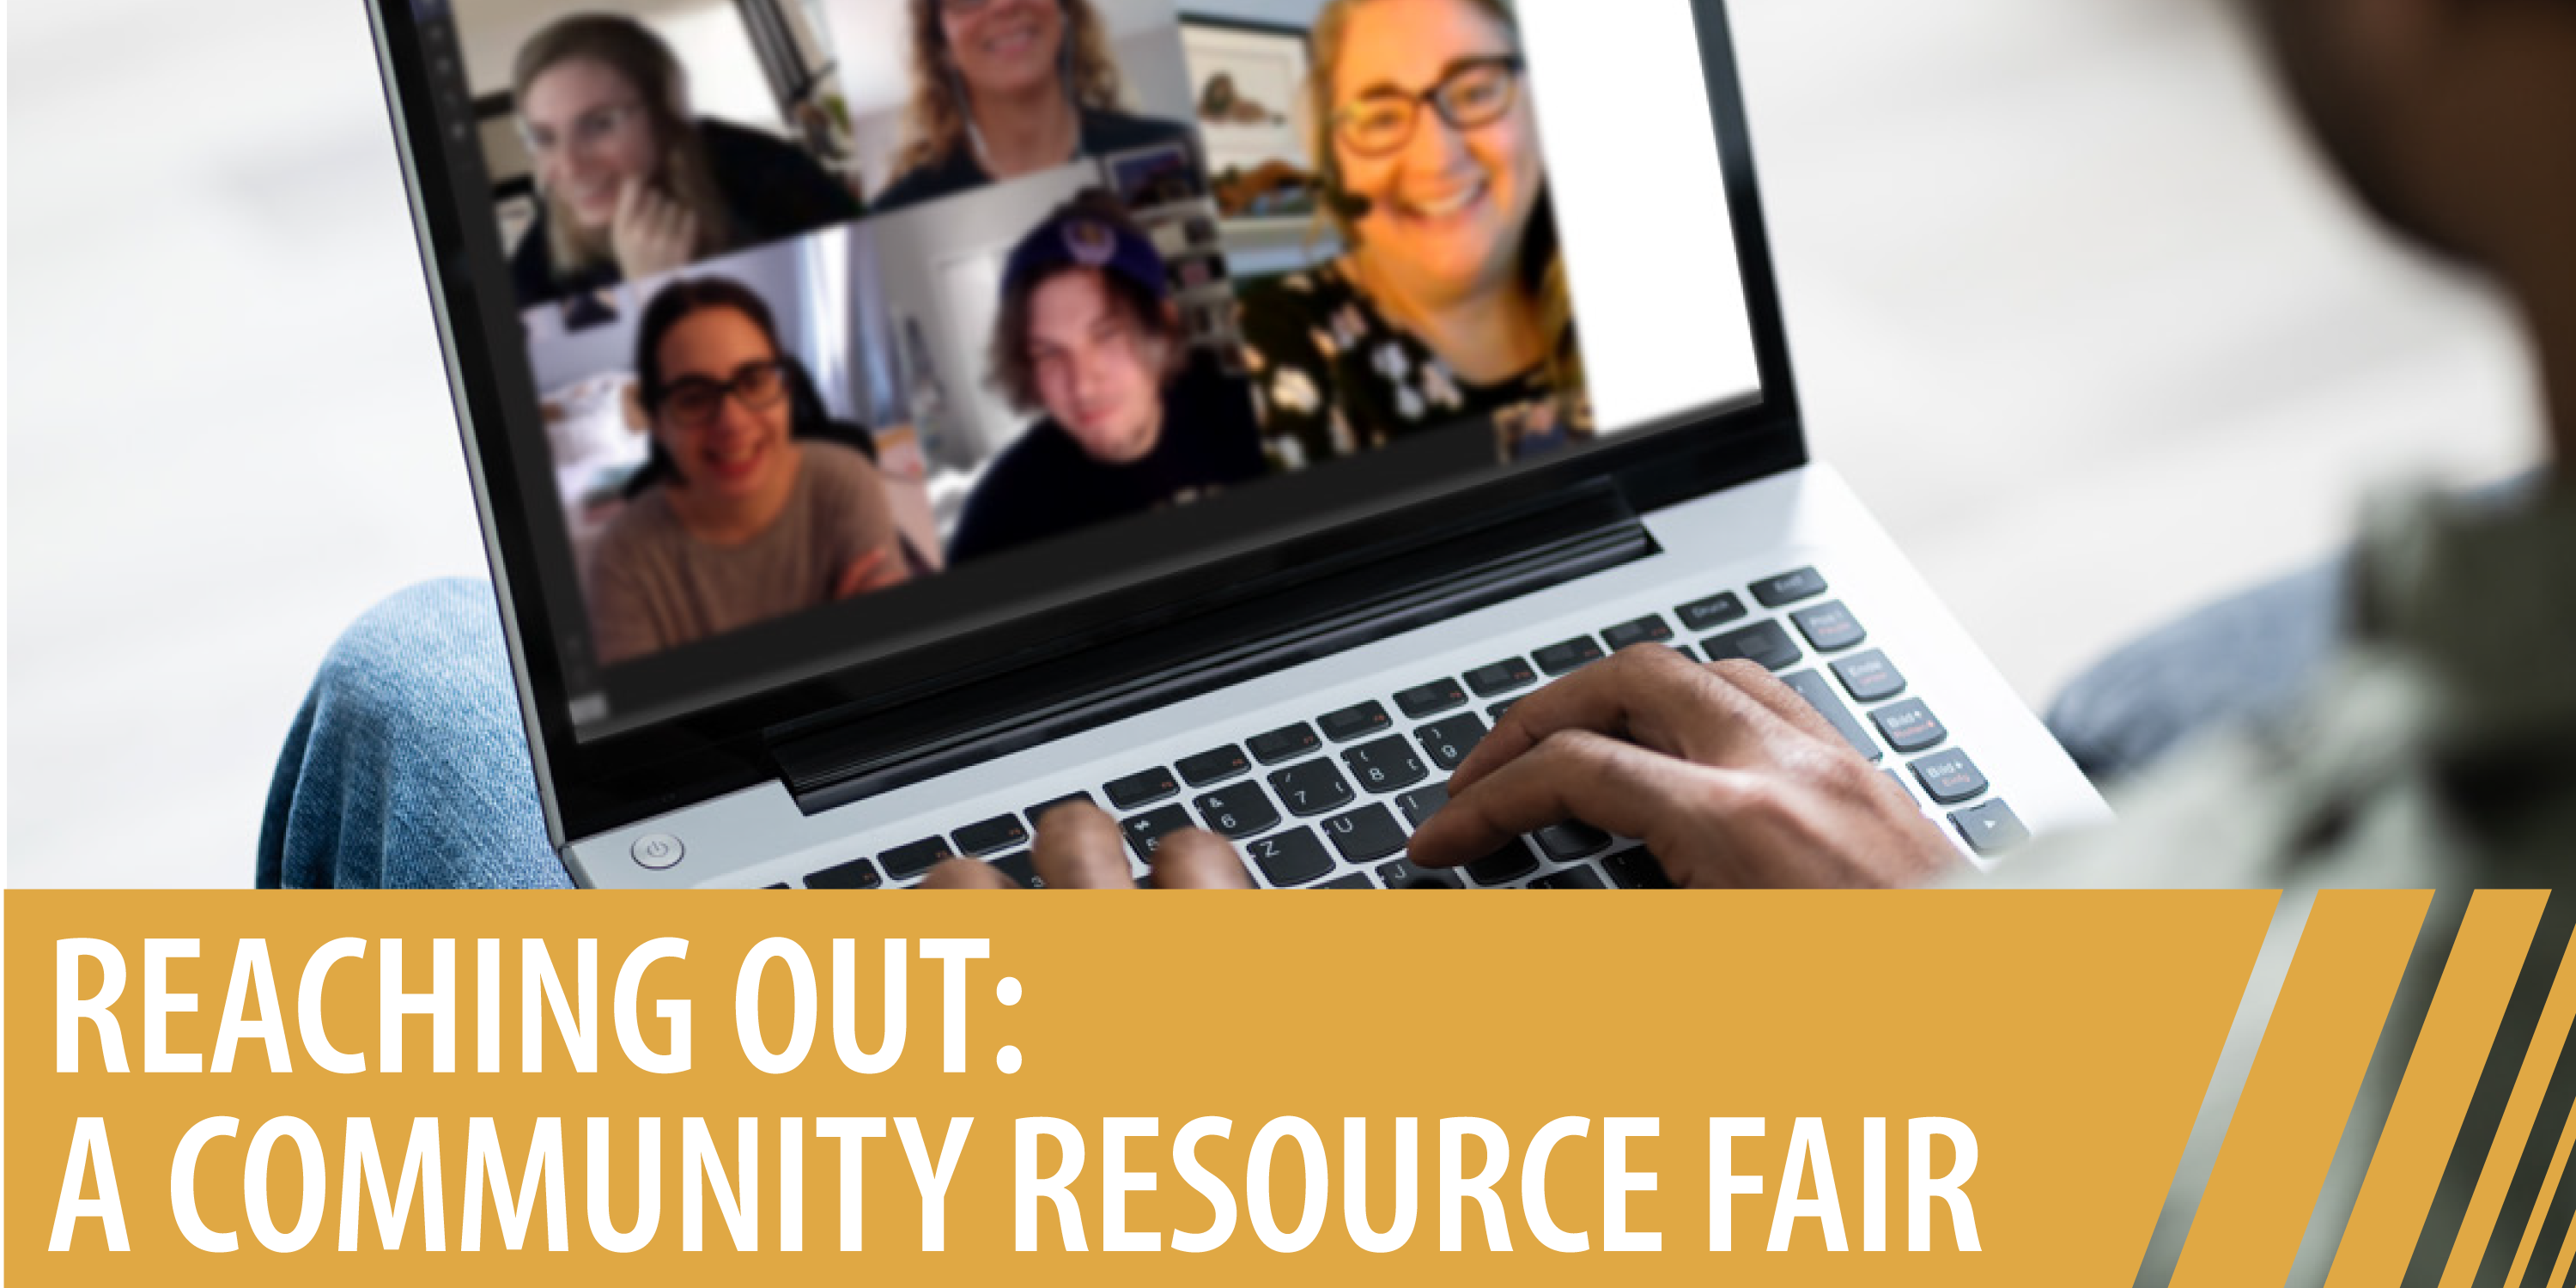 Reaching Out: A Community Resource Fair